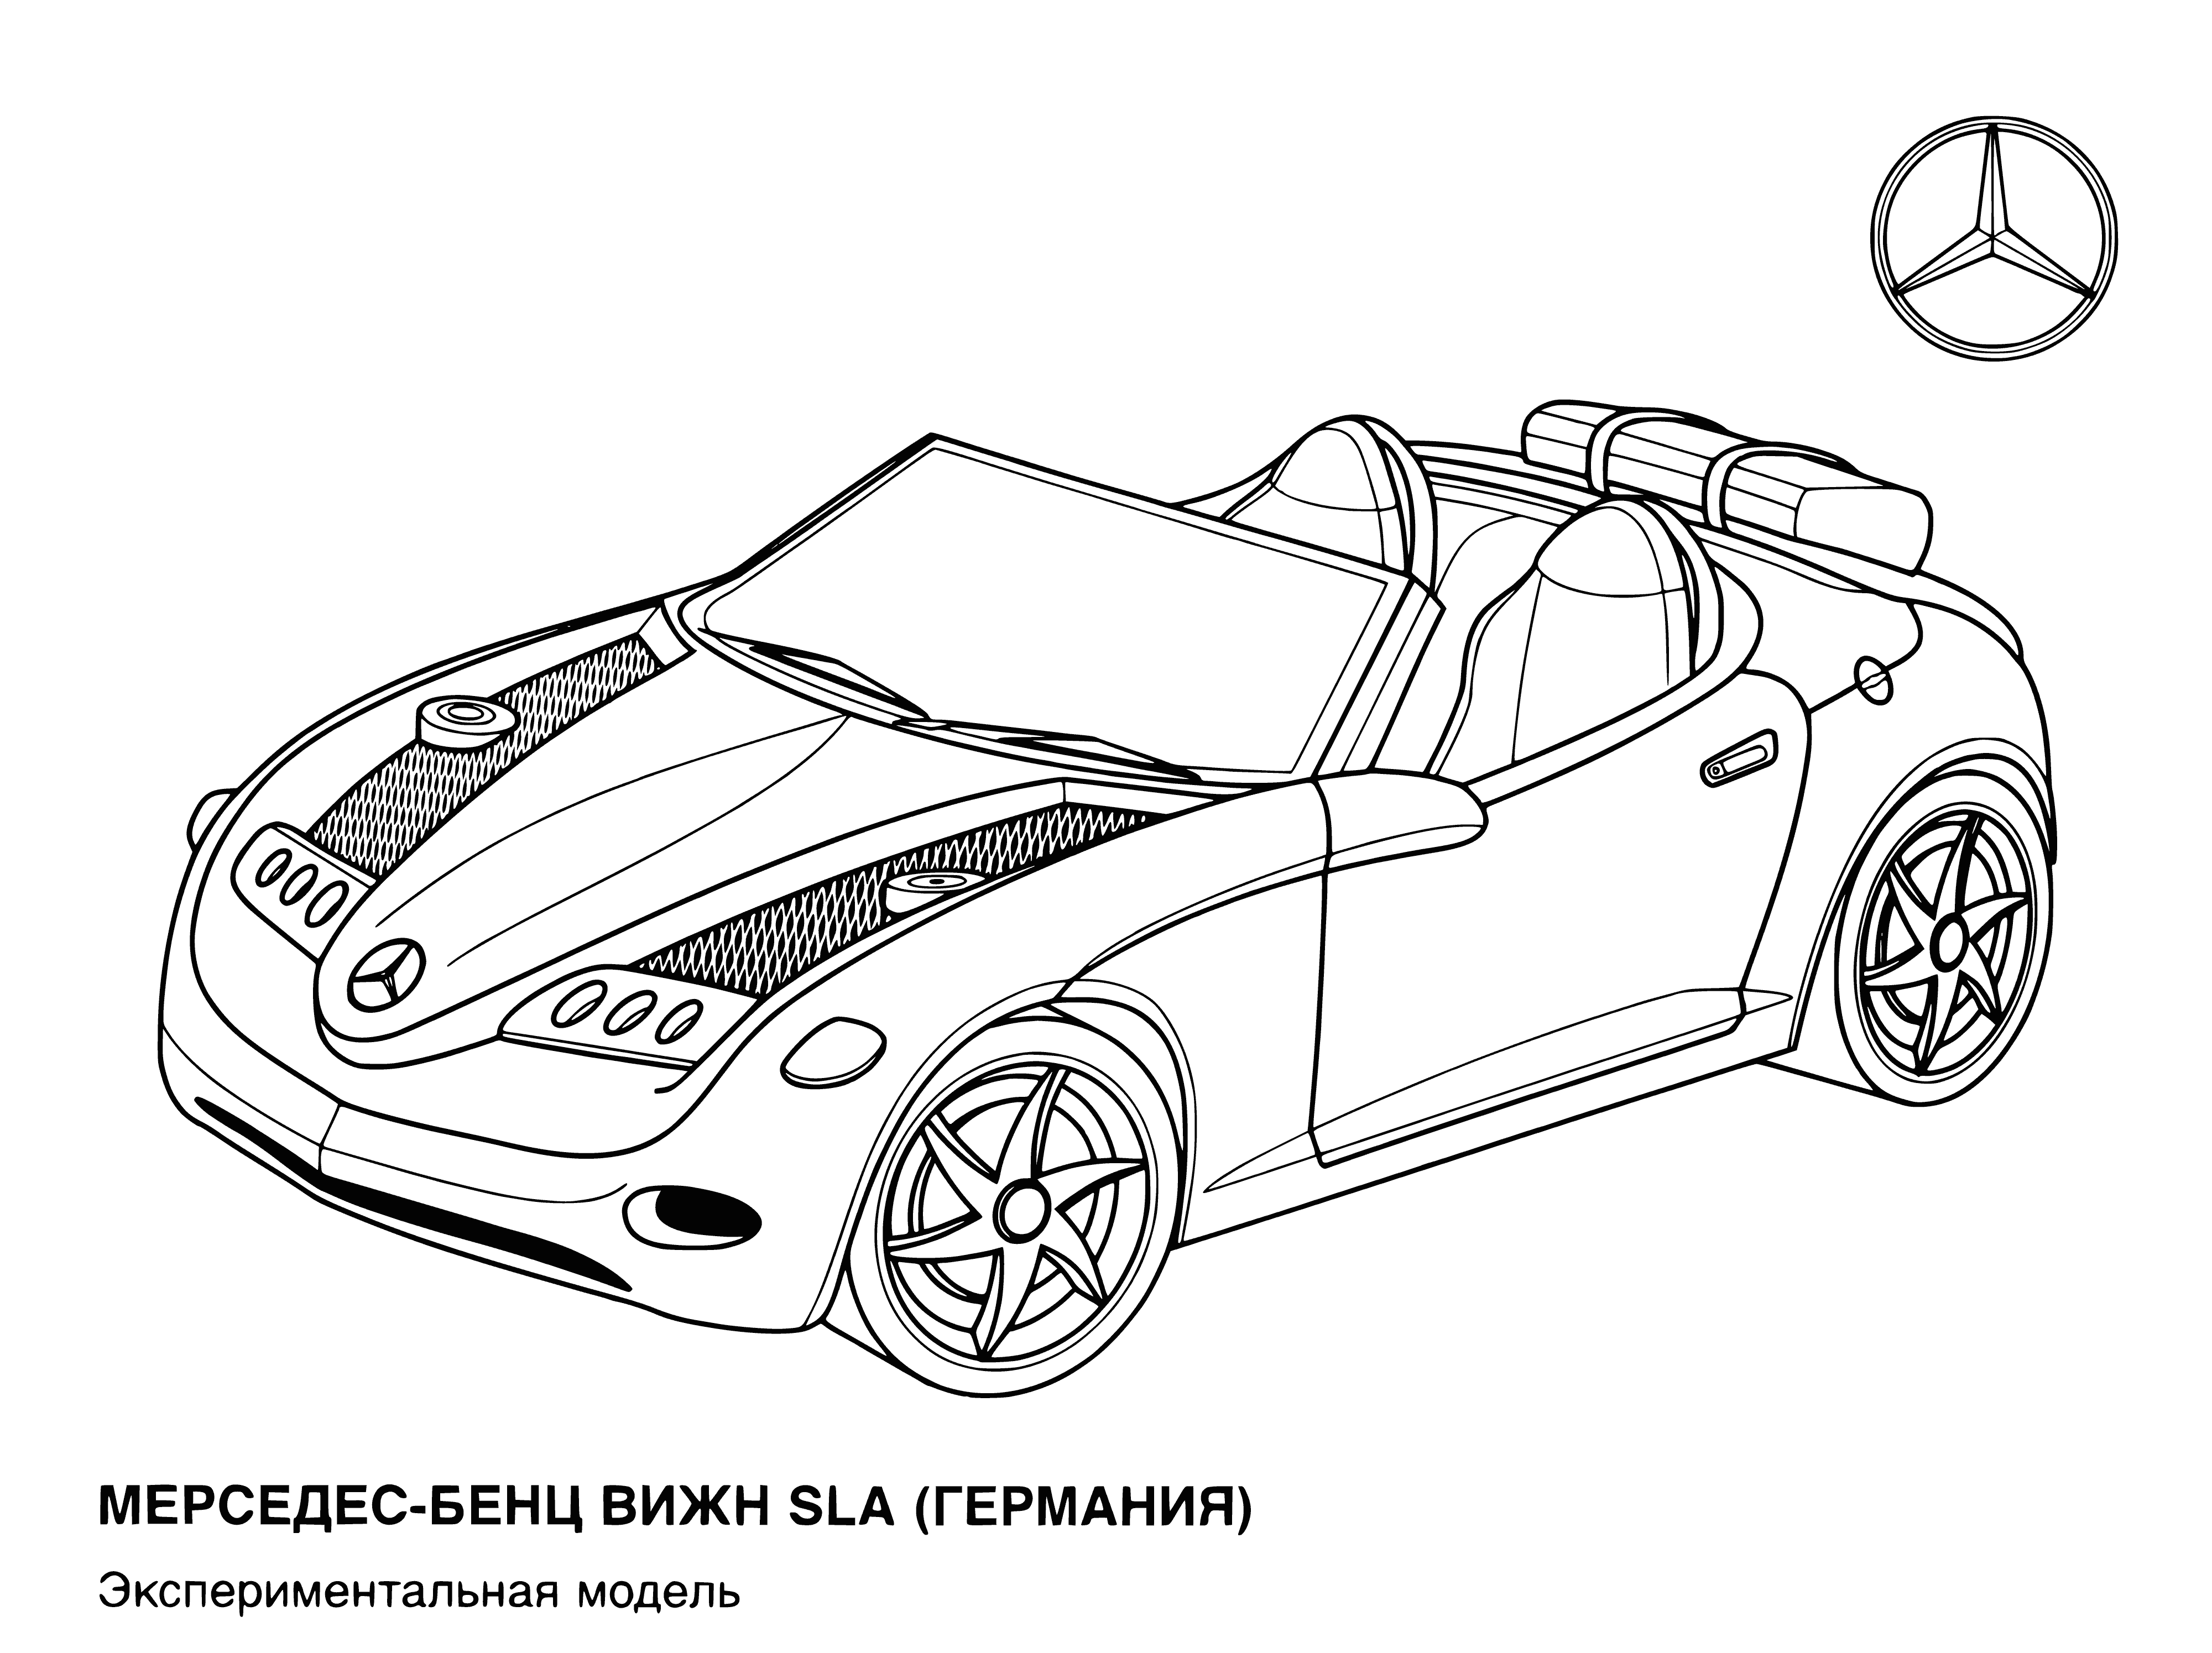 coloring page: Four silver Mercedes cars in a coloring page - sedan, SUV, convertible & coupe.